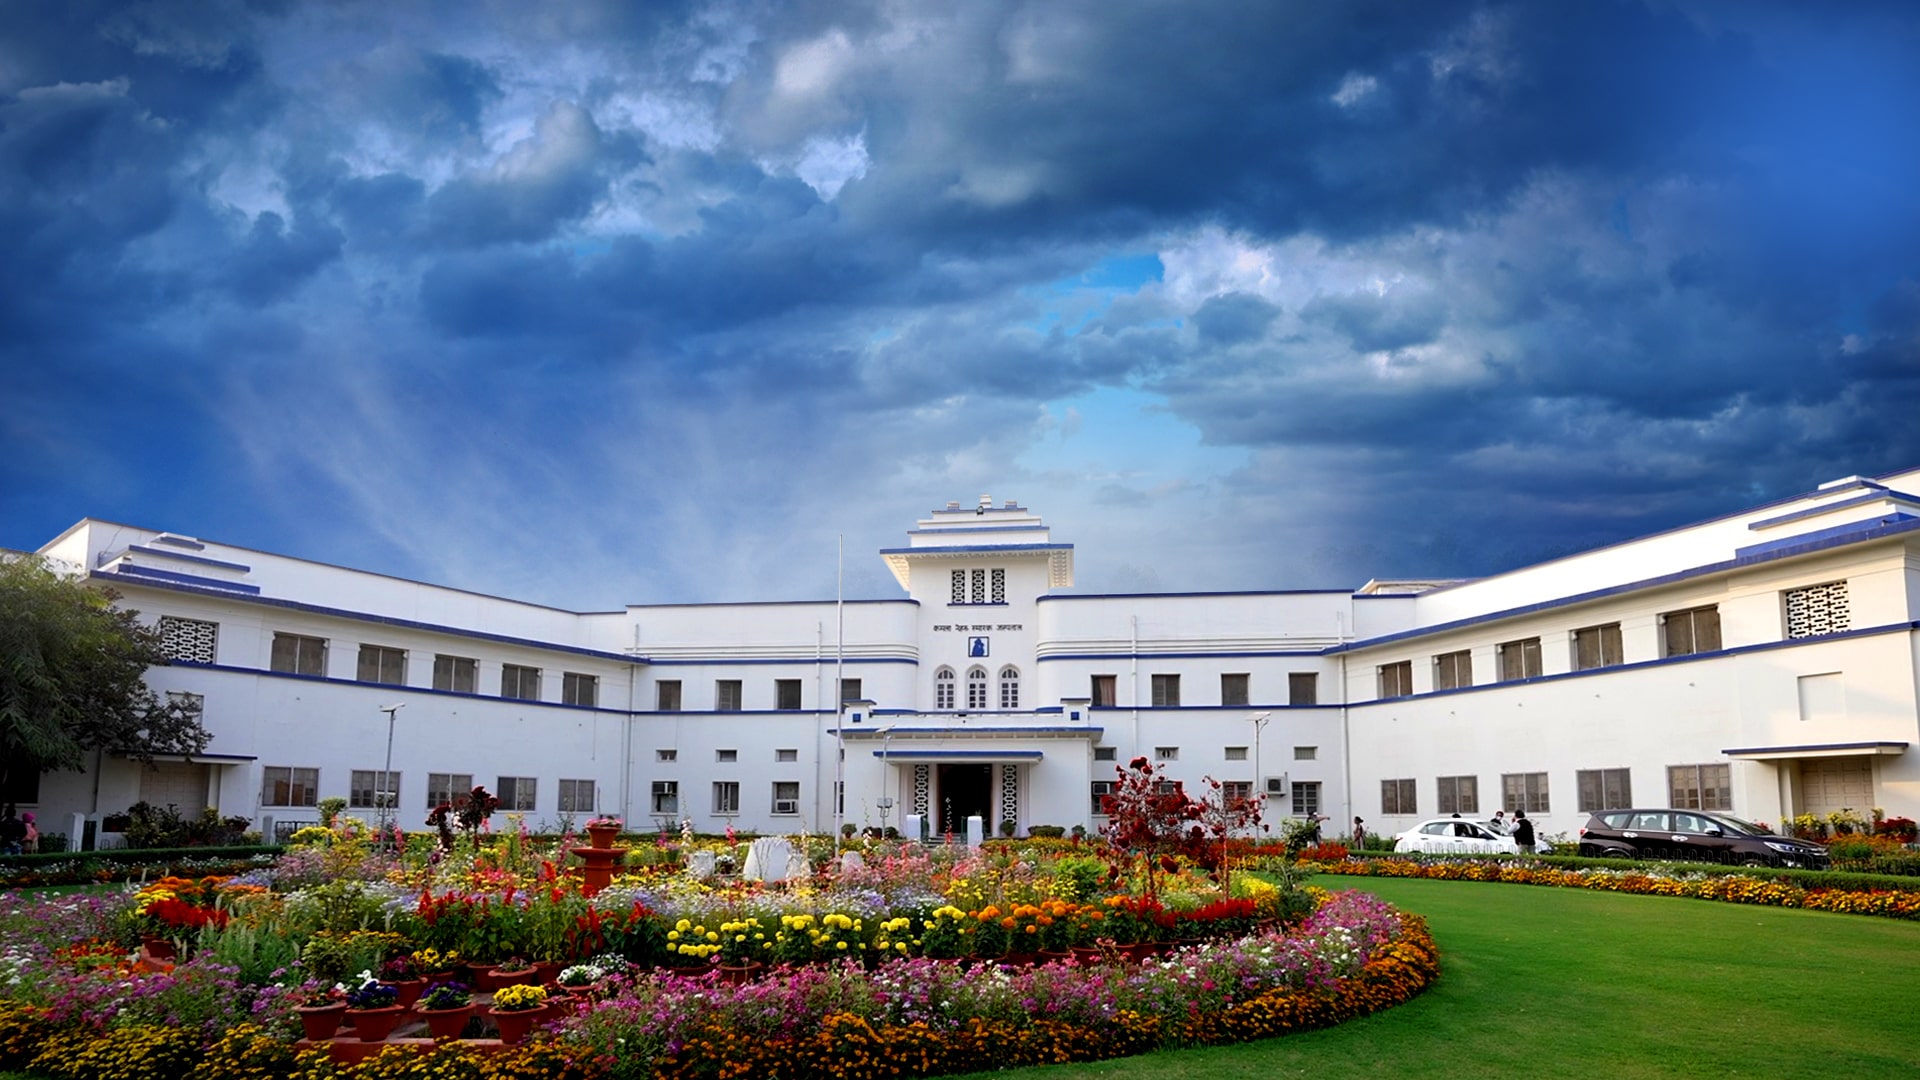 Kamala Nehru Memorial Hospital: An Enduring Tradition of Care Built on The Last Wish of a Freedom Fighter